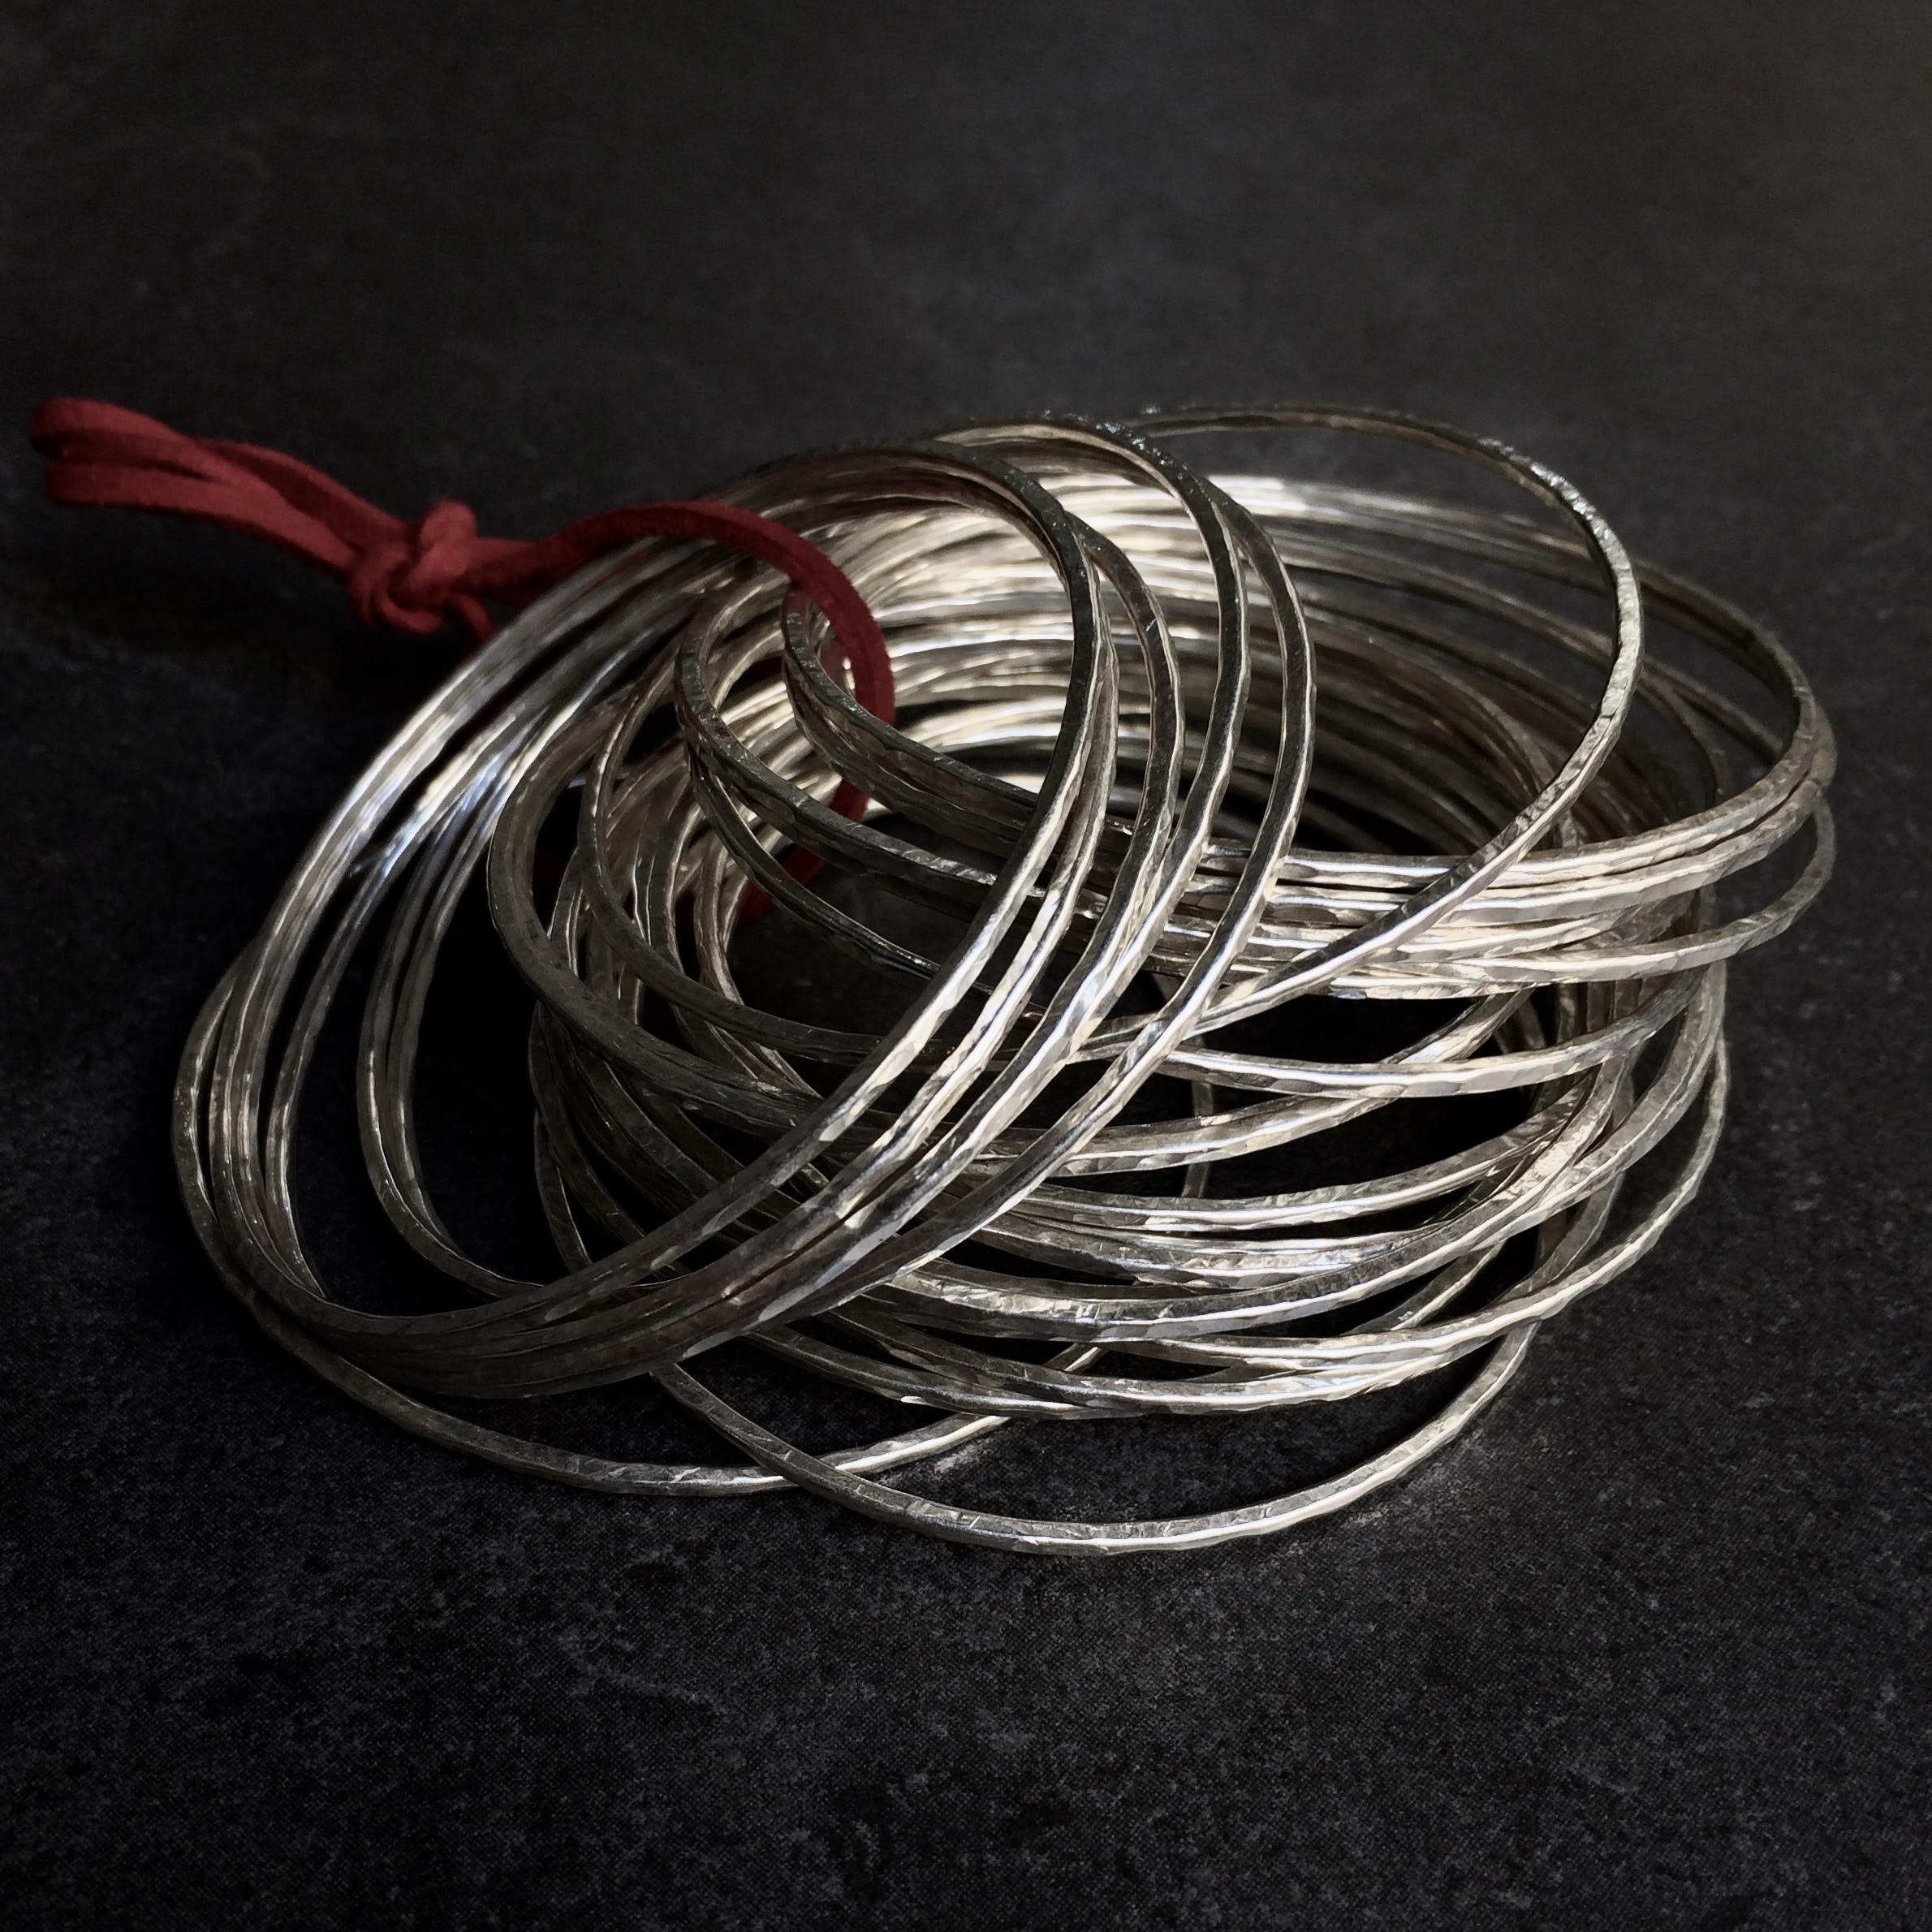 AMALFI Bangles  by herosisters - Luxury handmade silver jewelry and accessories